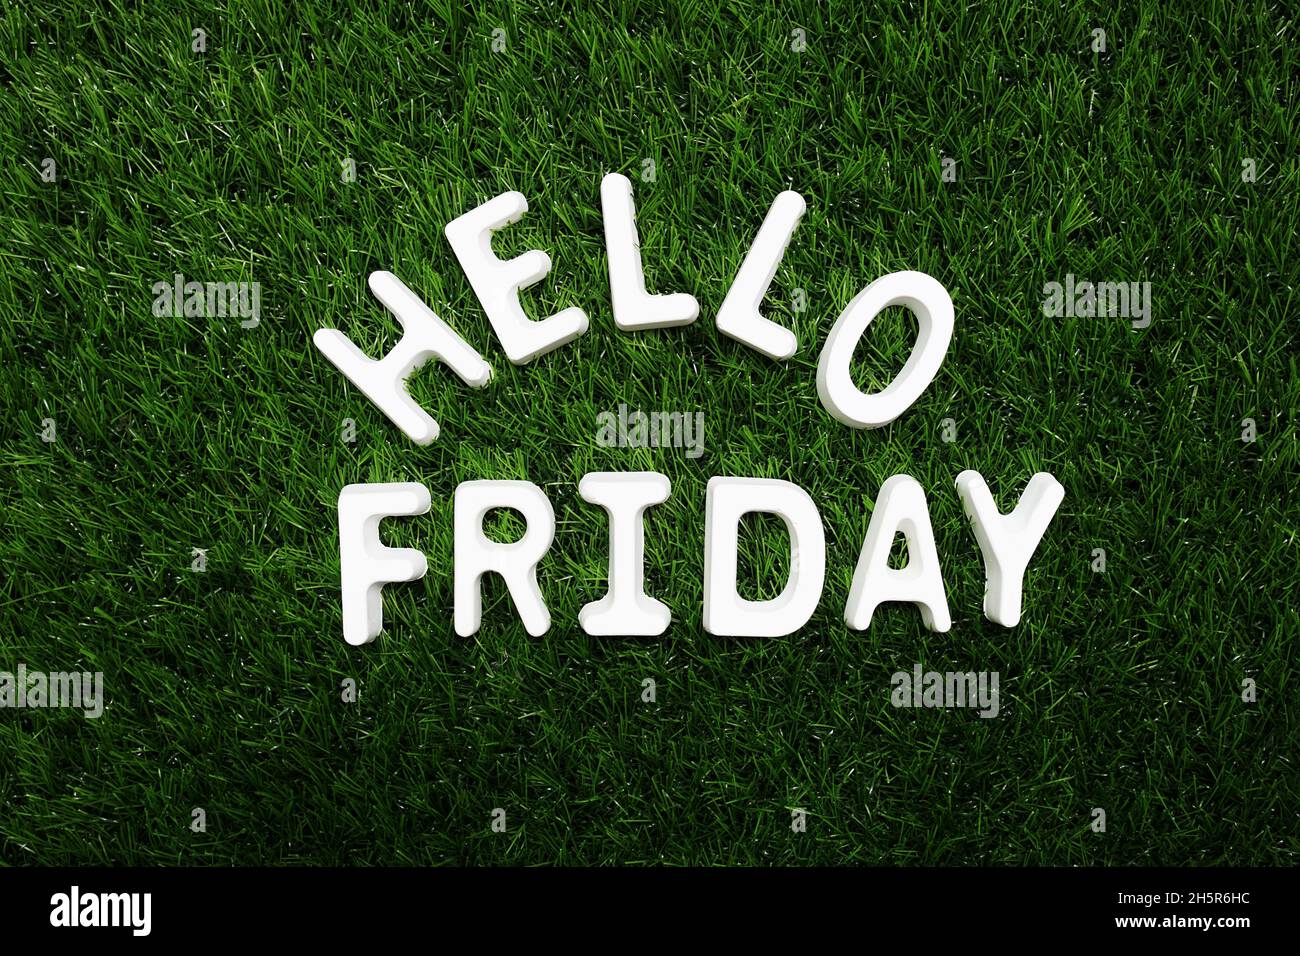 Hello Friday alphabet letter on green grass background Stock Photo